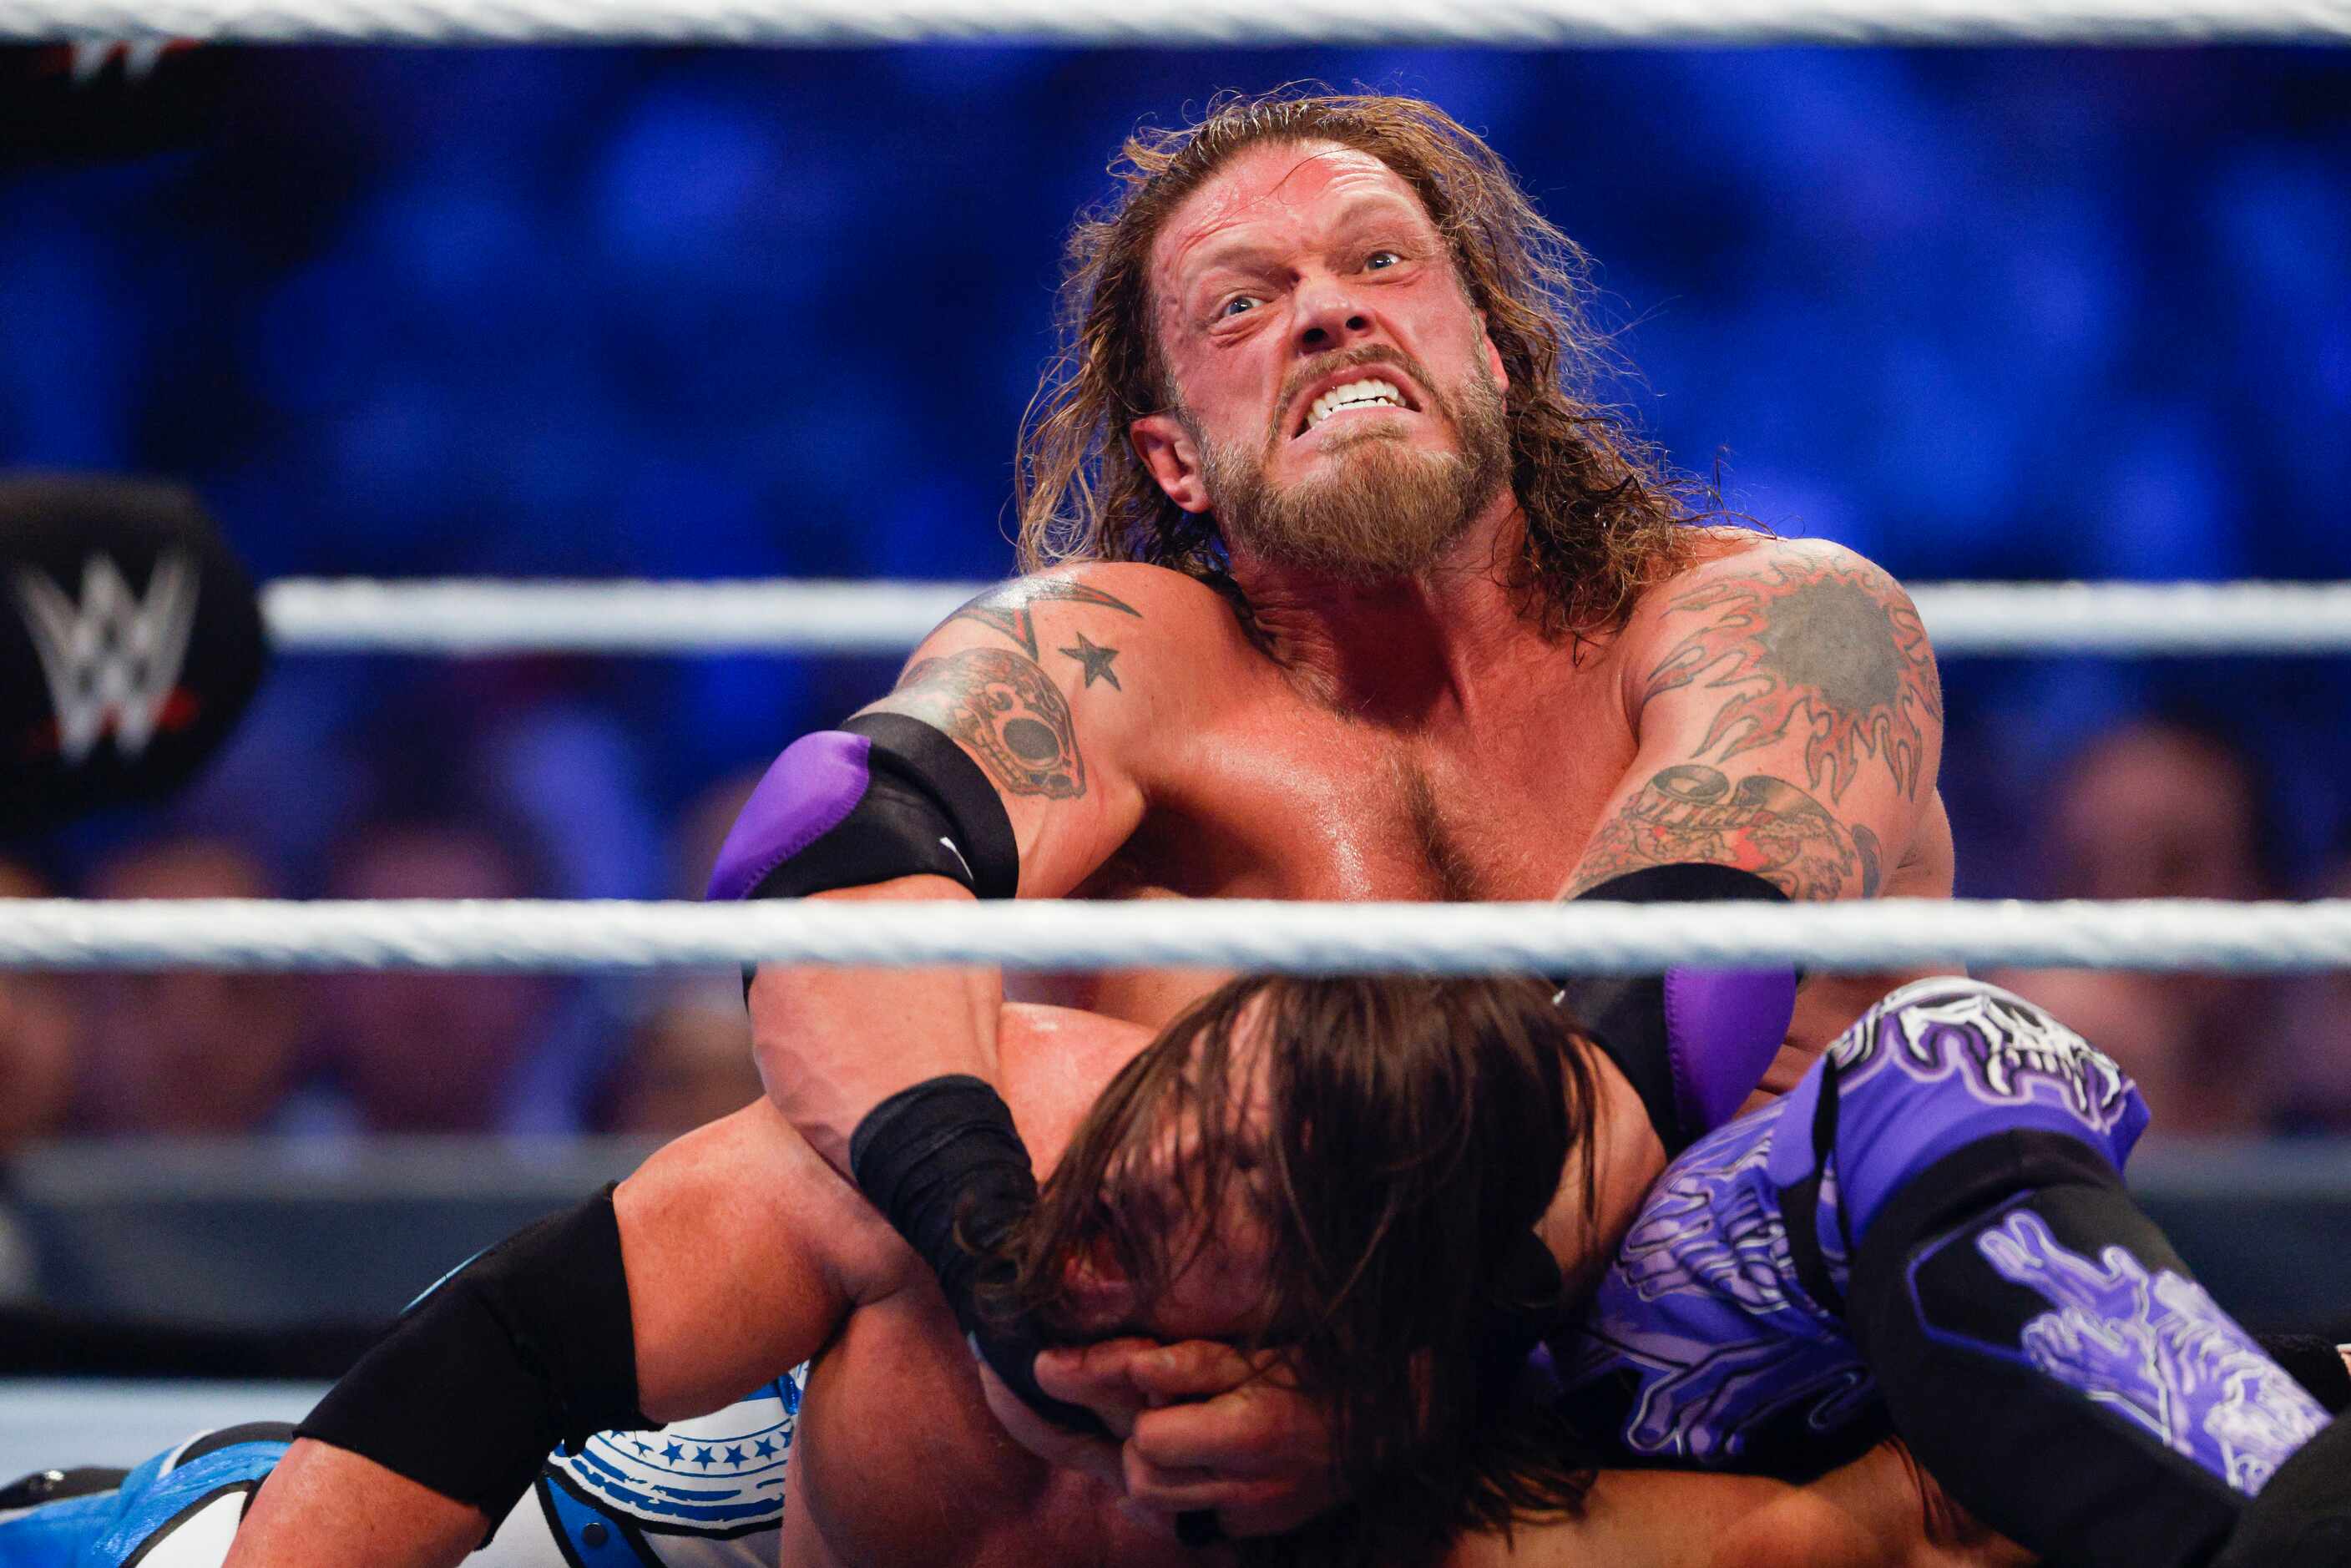 Edge wrestles AJ Styles during a match at WrestleMania Sunday at AT&T Stadium in Arlington,...